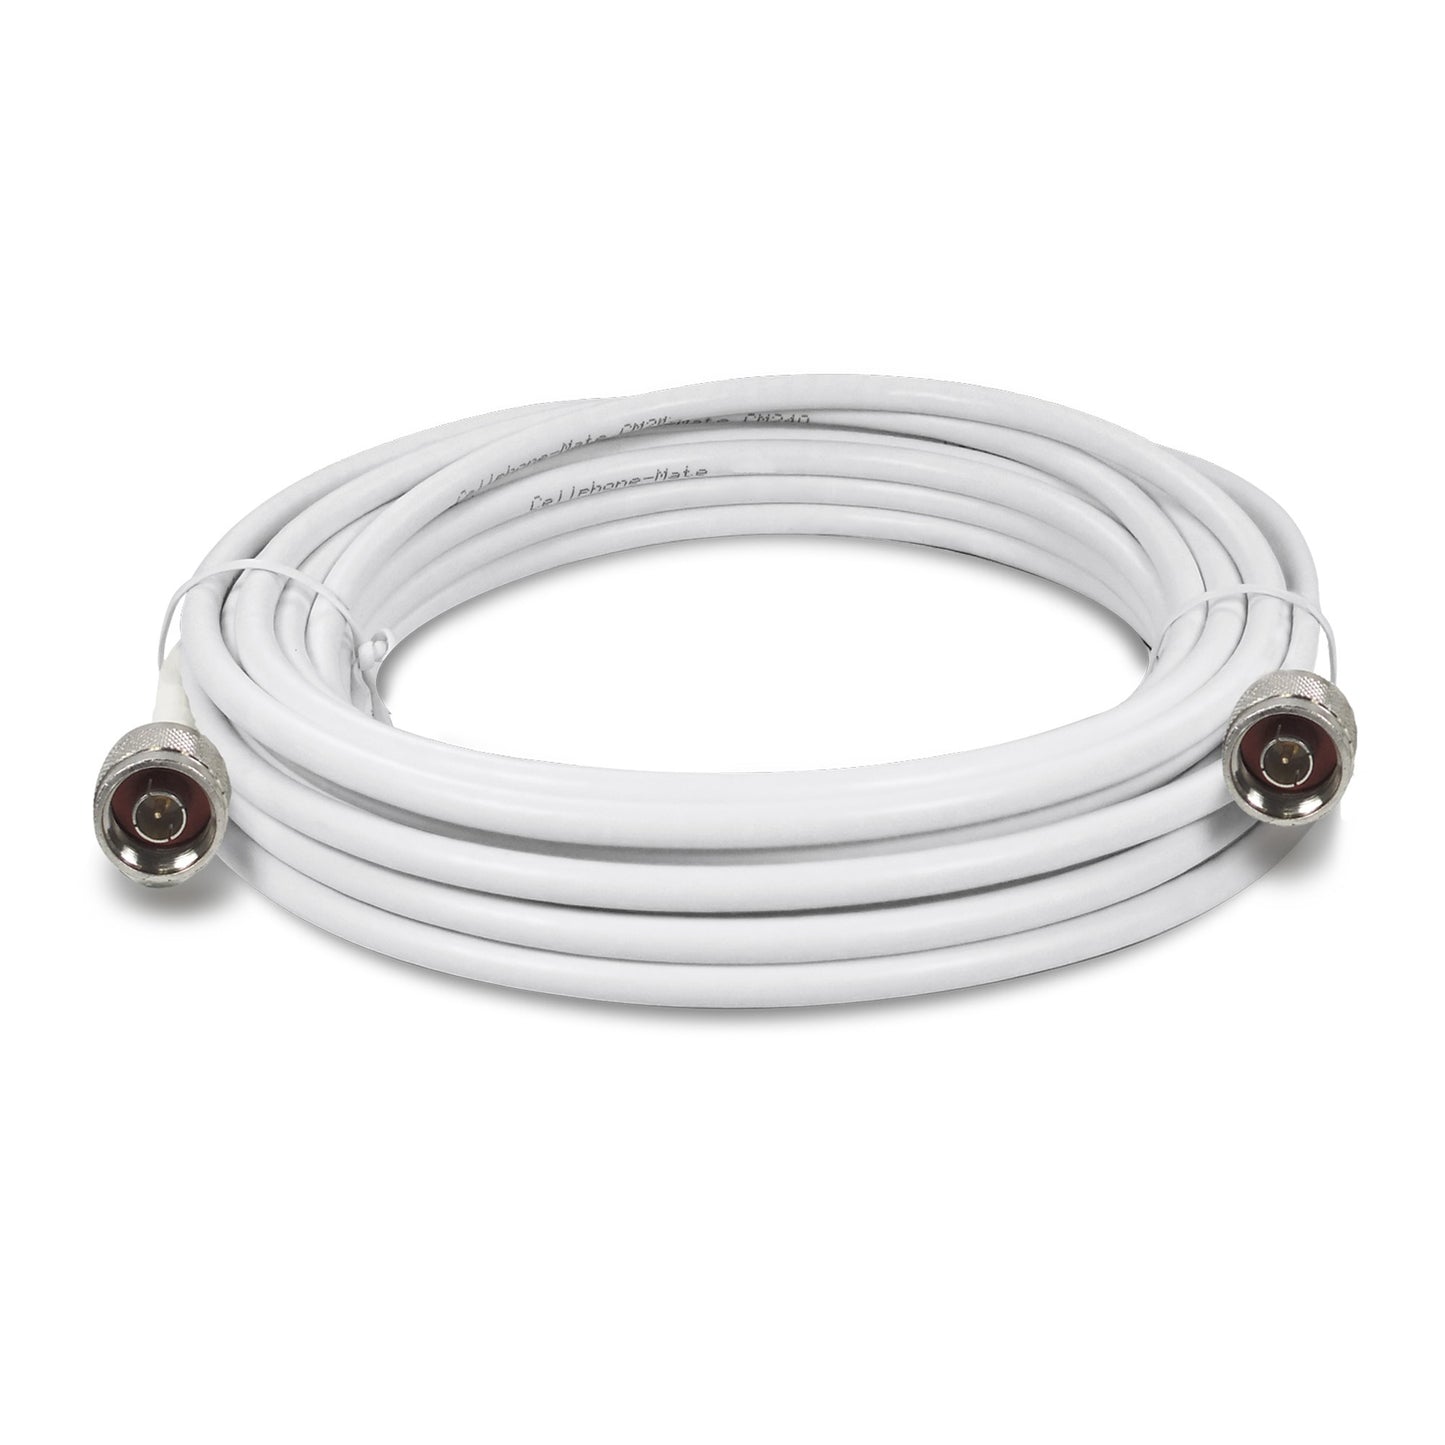 SureCall Cable 20 ft. White SC-240 Ultra Low Loss Coax Cable - N-Male - 15-07258